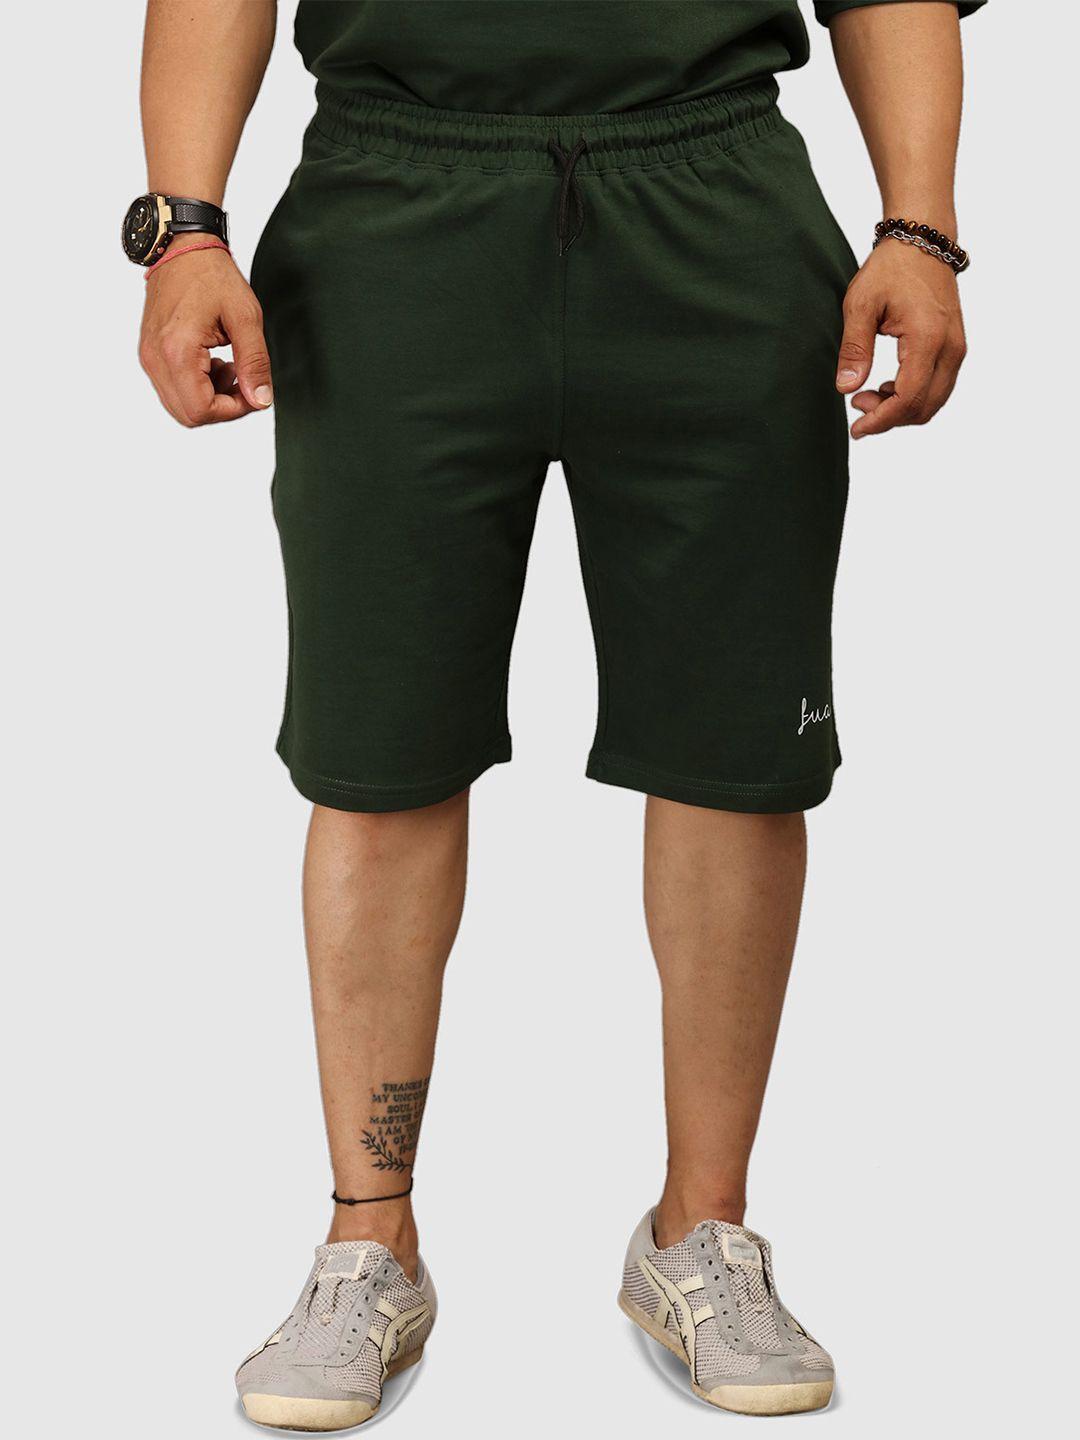 fuaark men olive green loose fit training or gym antimicrobial sports shorts